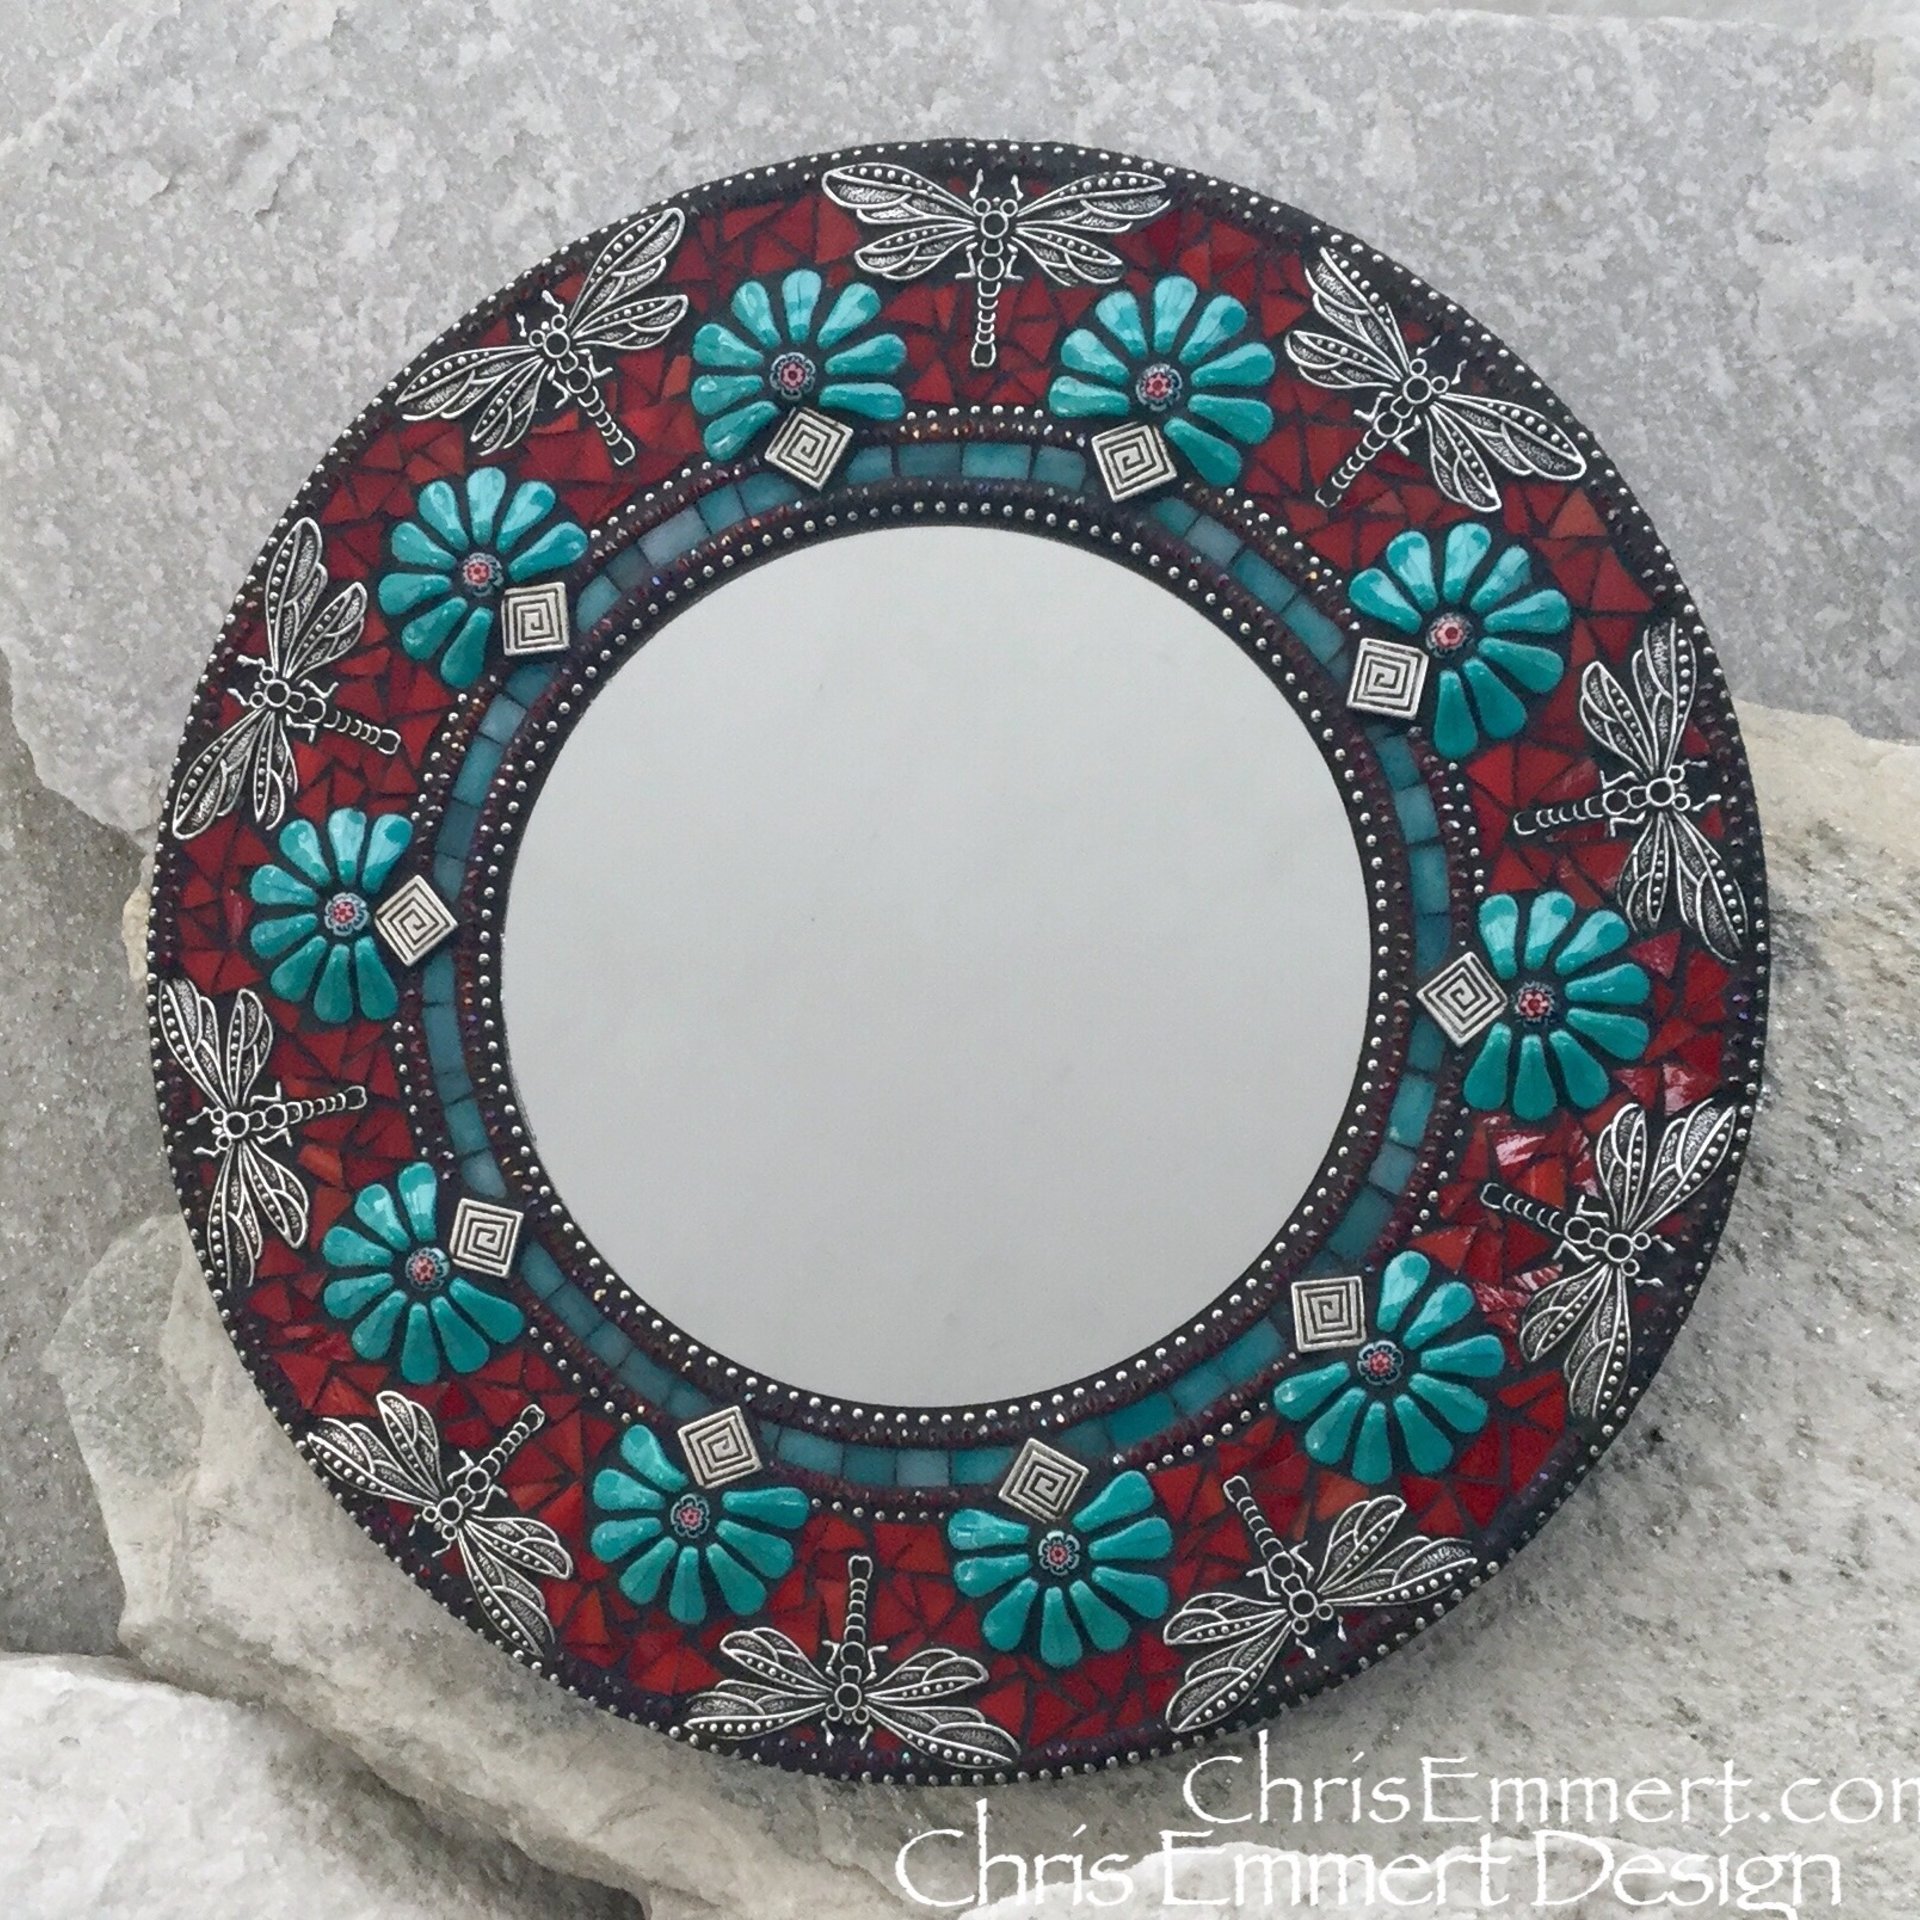 Teal and Red Dragonfly Mosaic Mirror, Round Mosaic Mirror, Home Decor